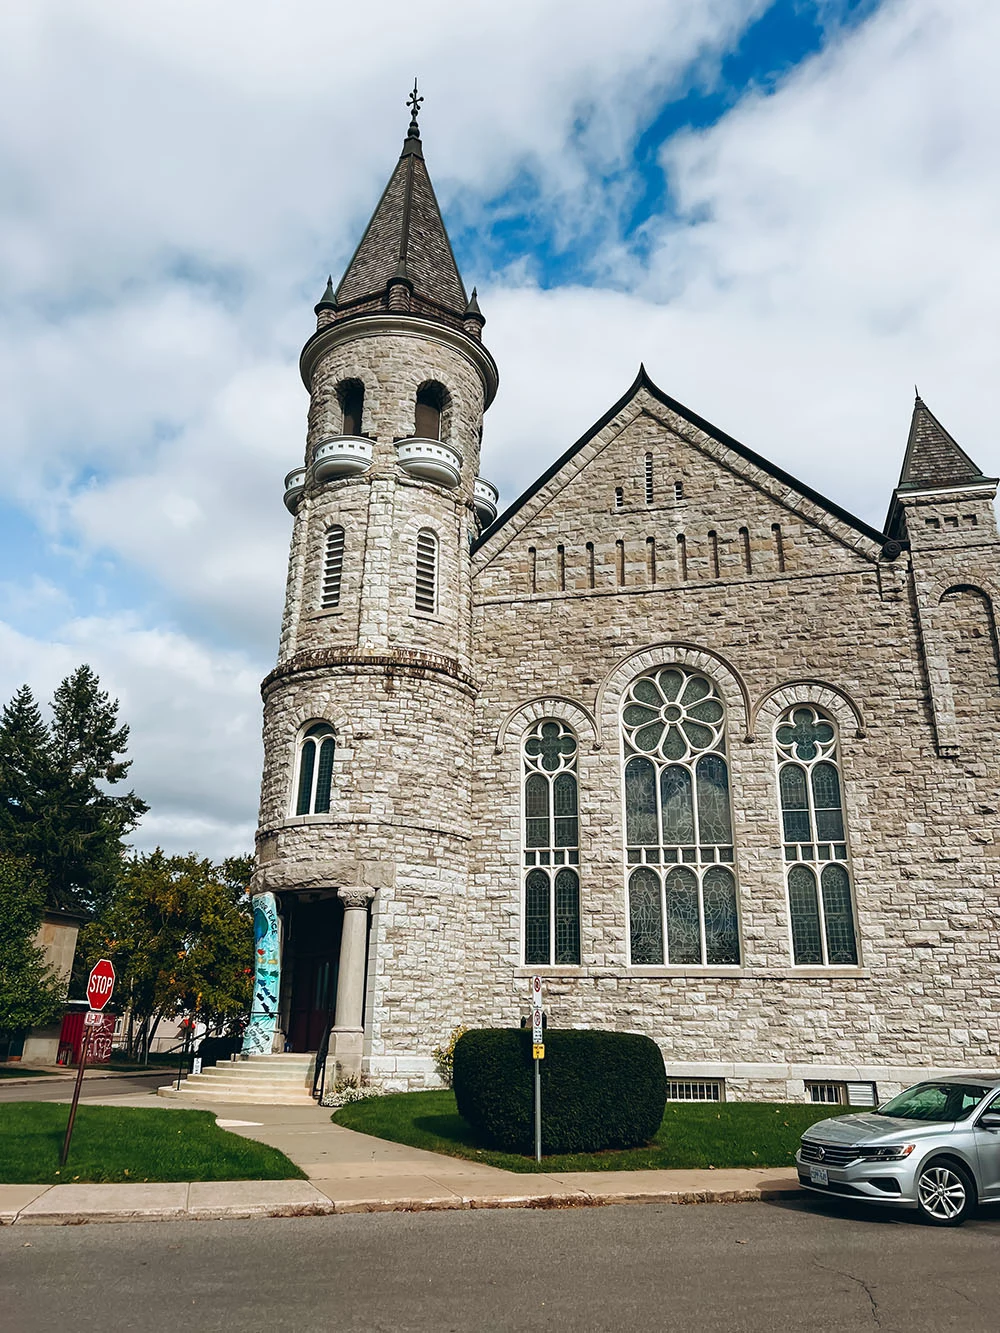 Planning a trip to Kingston, Ontario soon? This guide to the best things to do in Kingston is for you! From the top Kingston activities and attractions, to the must see sights, best restaurants, bars, and everything in between. You won’t want to miss this guide that will help you plan your perfect Kingston getaway. Pictured here: Beautiful church in Kingston